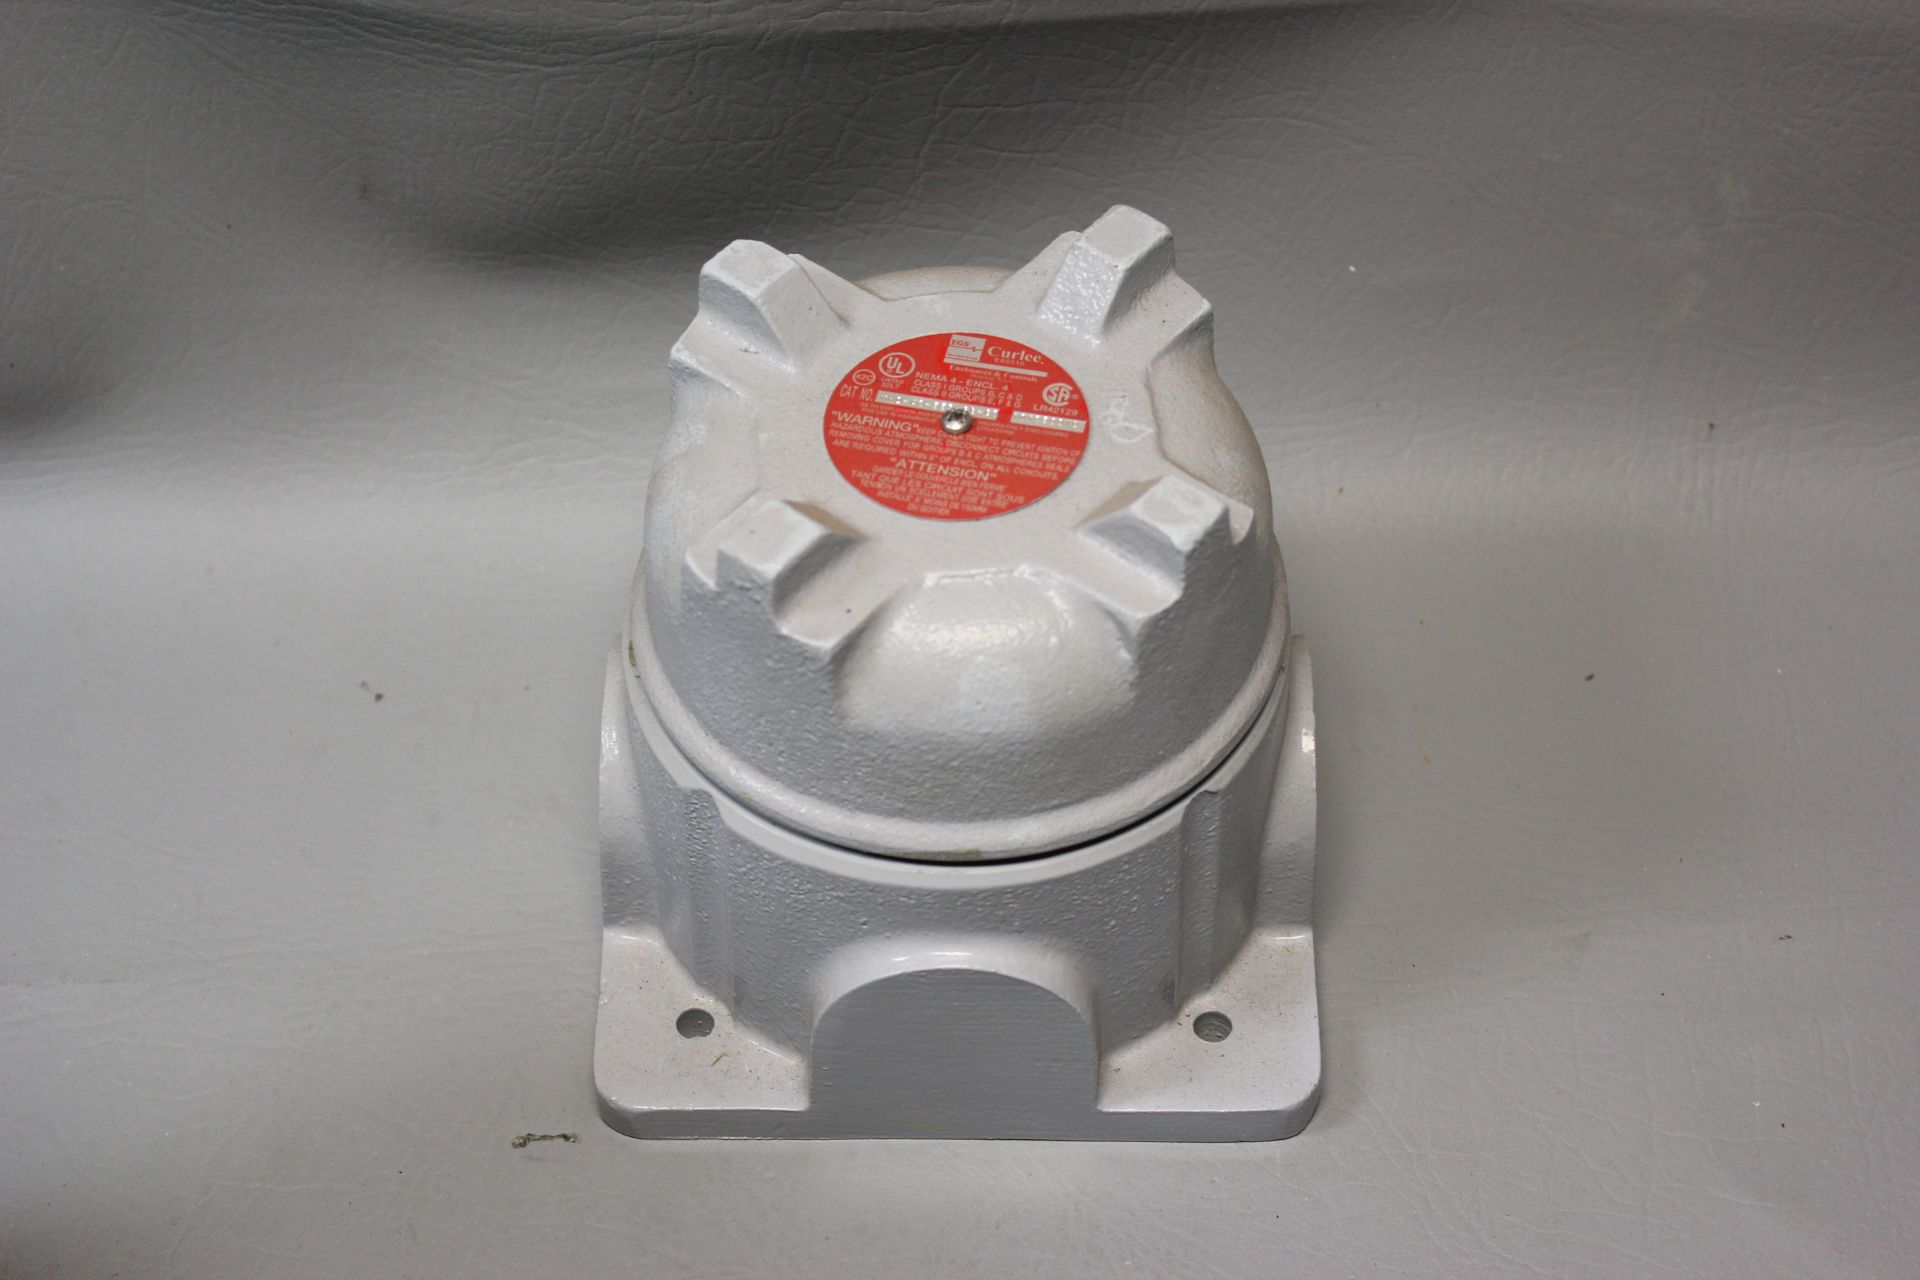 NEW METRIX SOLID STATE VIBRATION SWITCH IN ENCLOSURE - Image 3 of 5